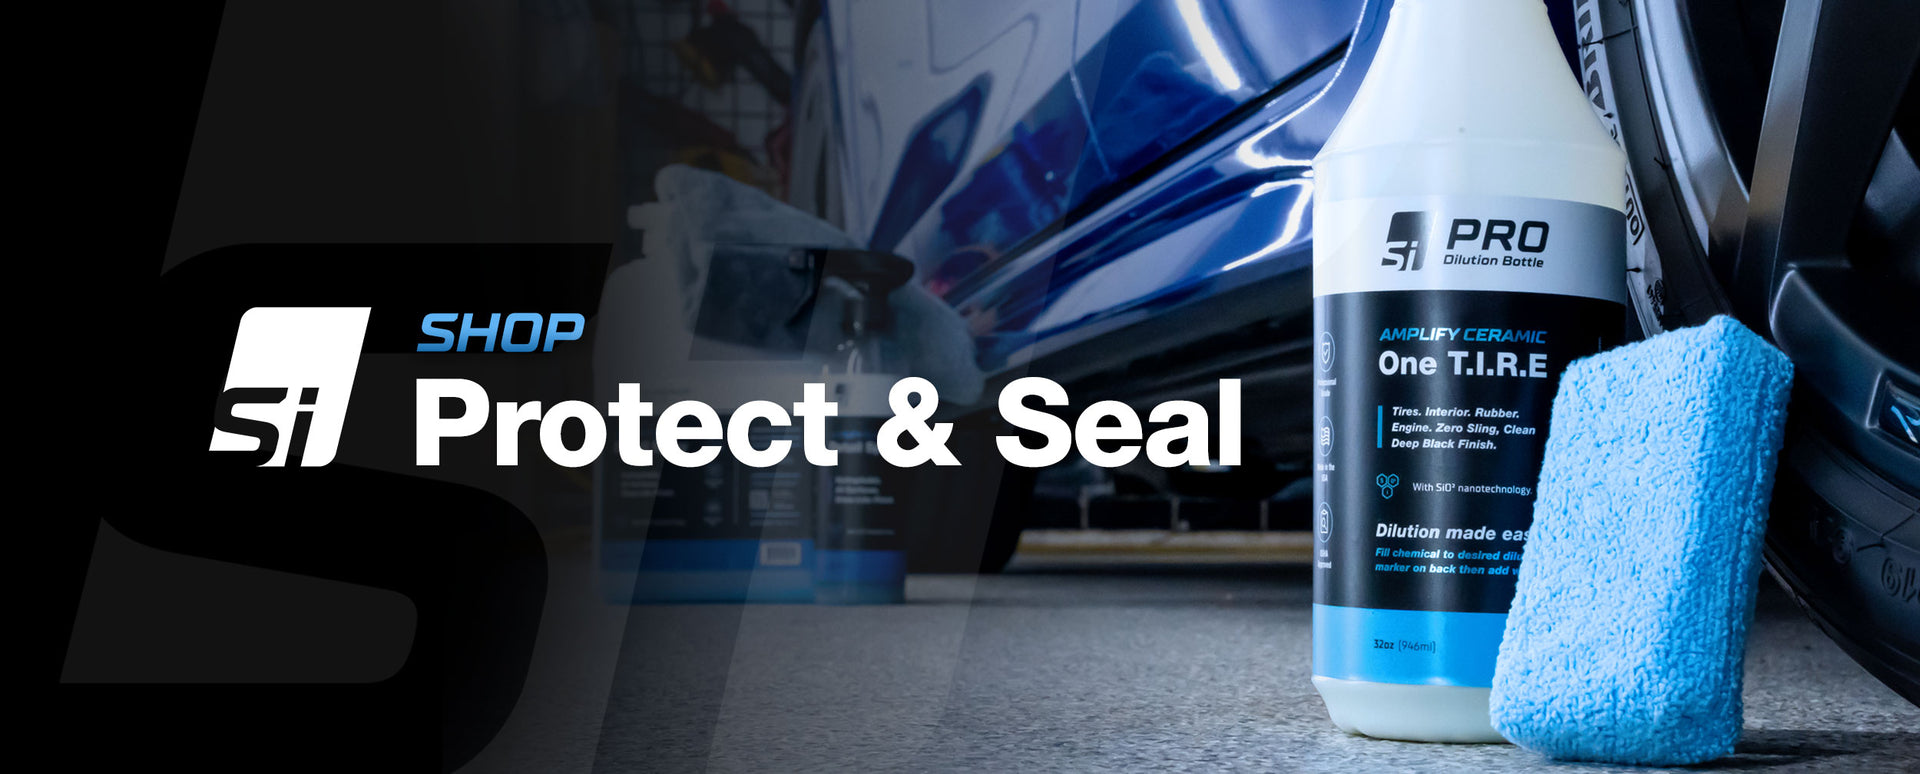 Protect & Seal